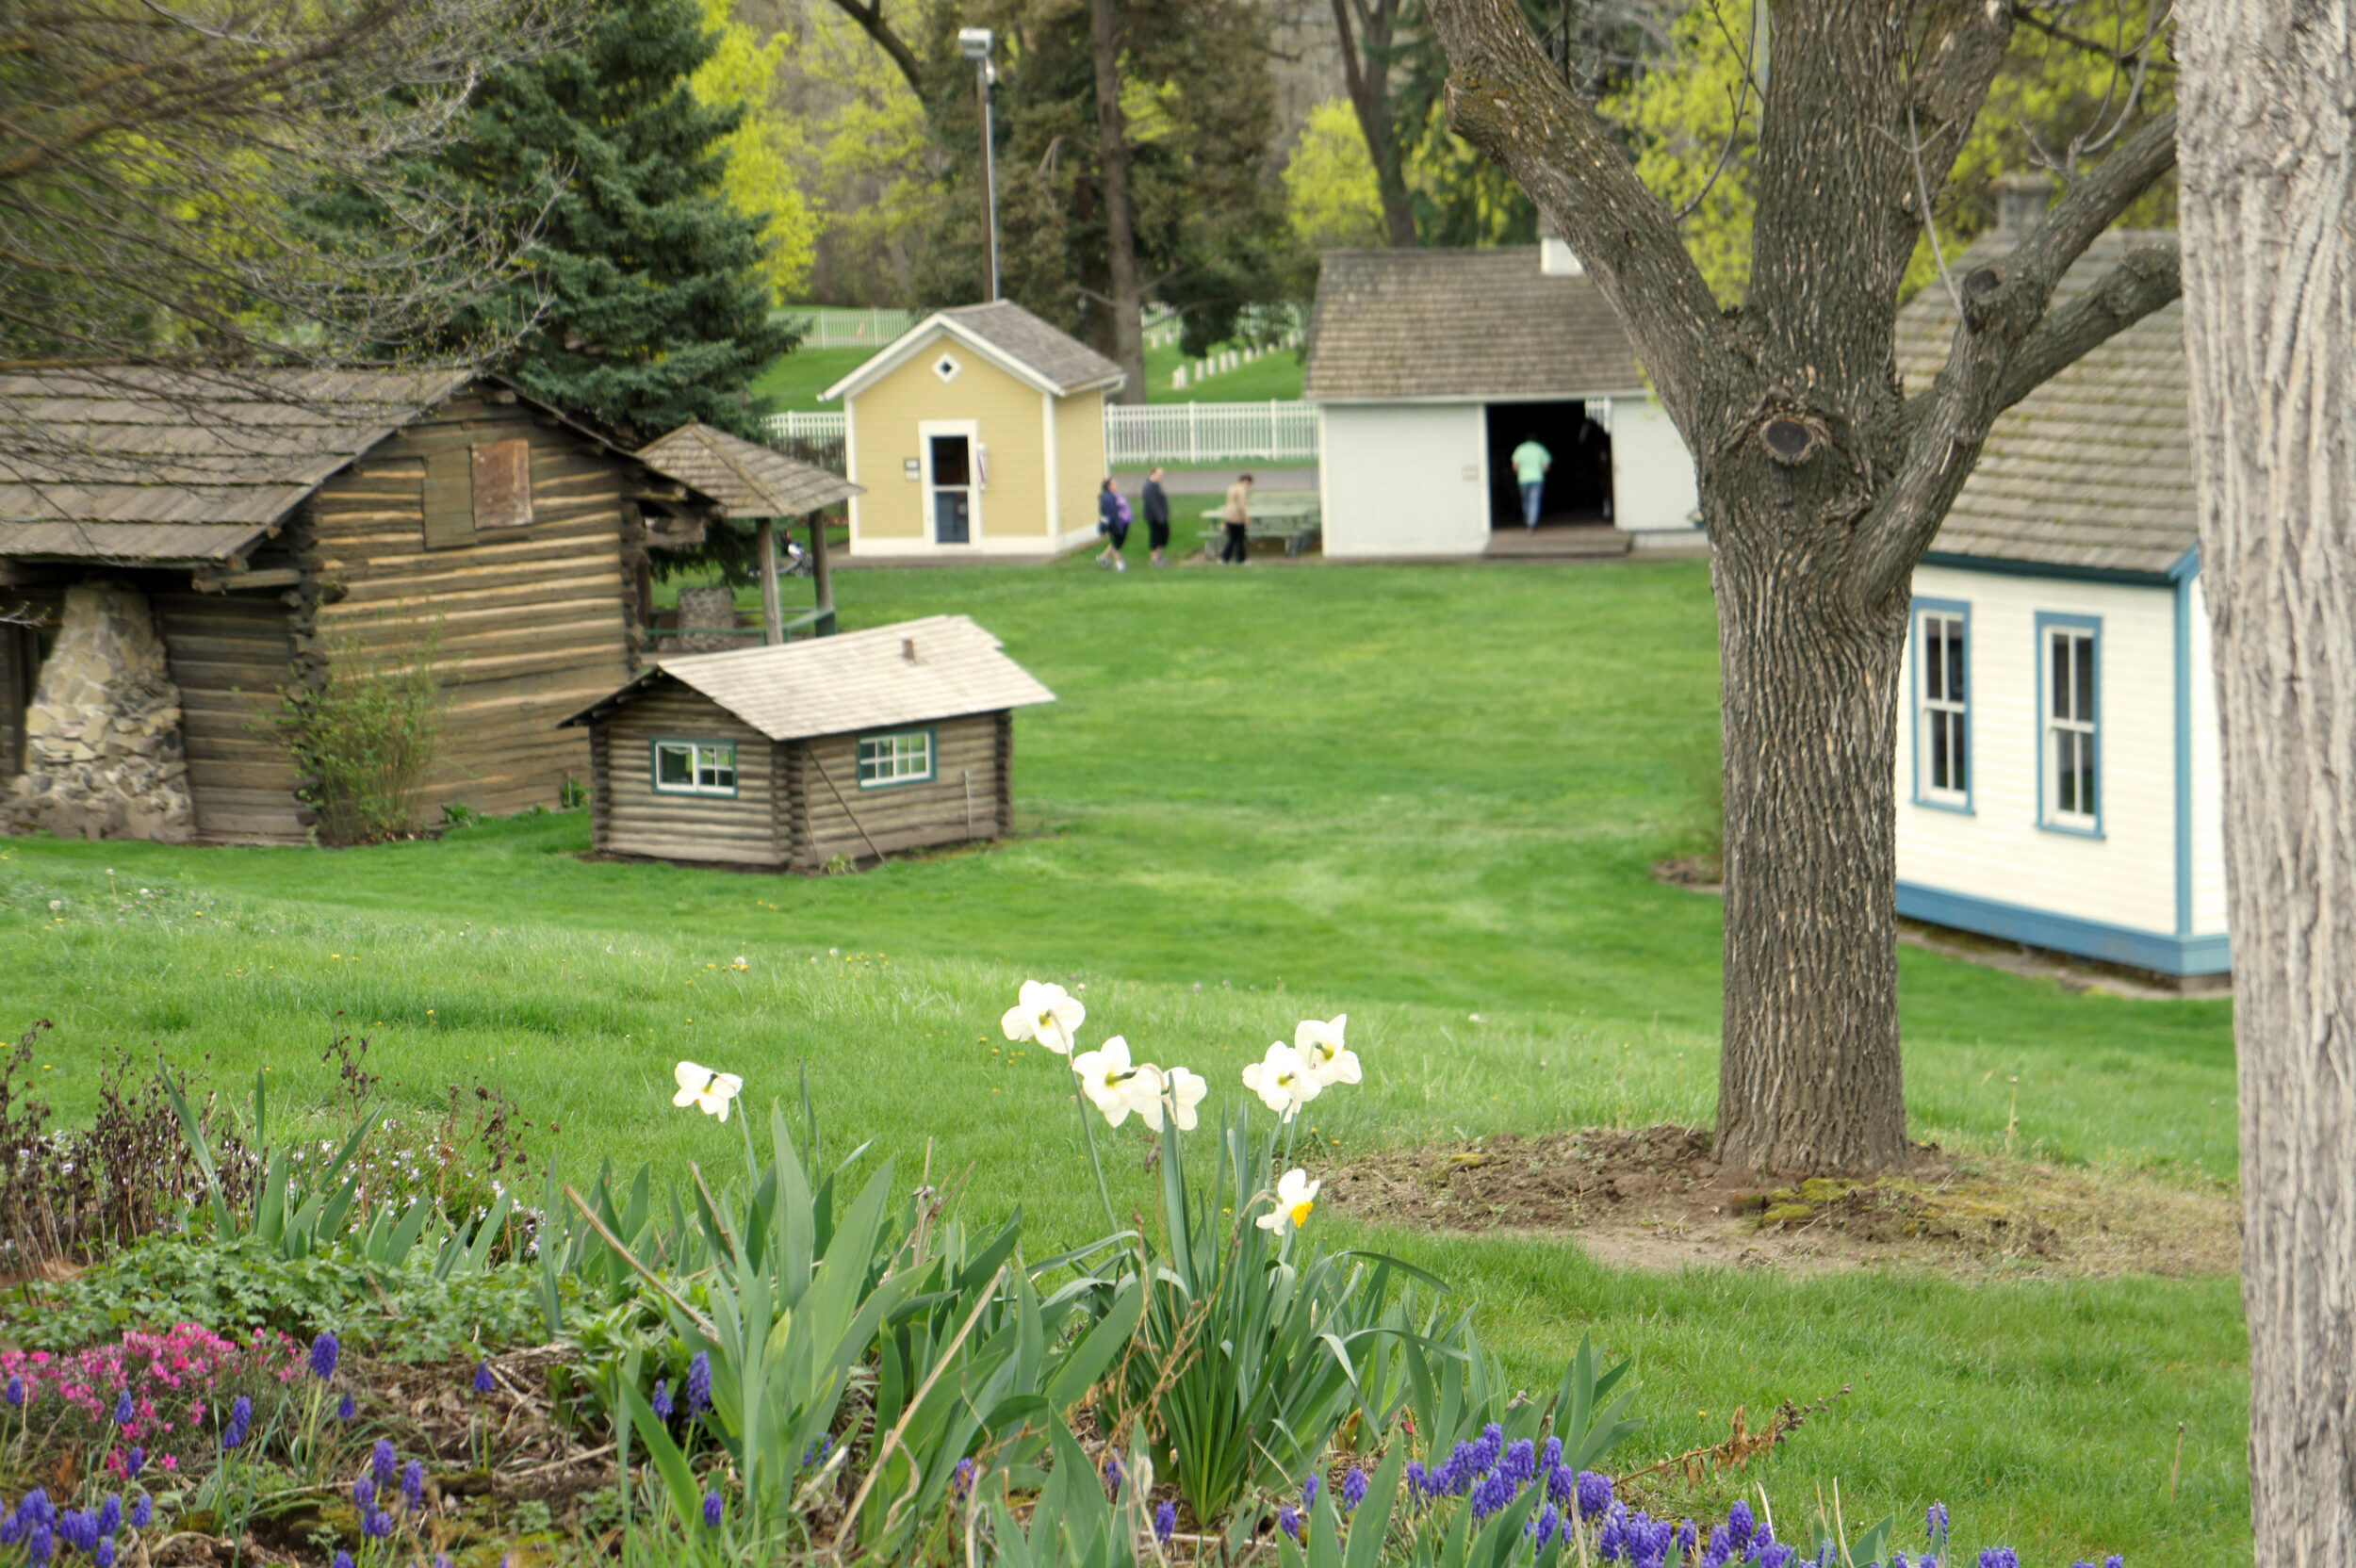 An exterior shot of the museum's pioneer village, showing green grass, flowers, and several old wooden buildings.